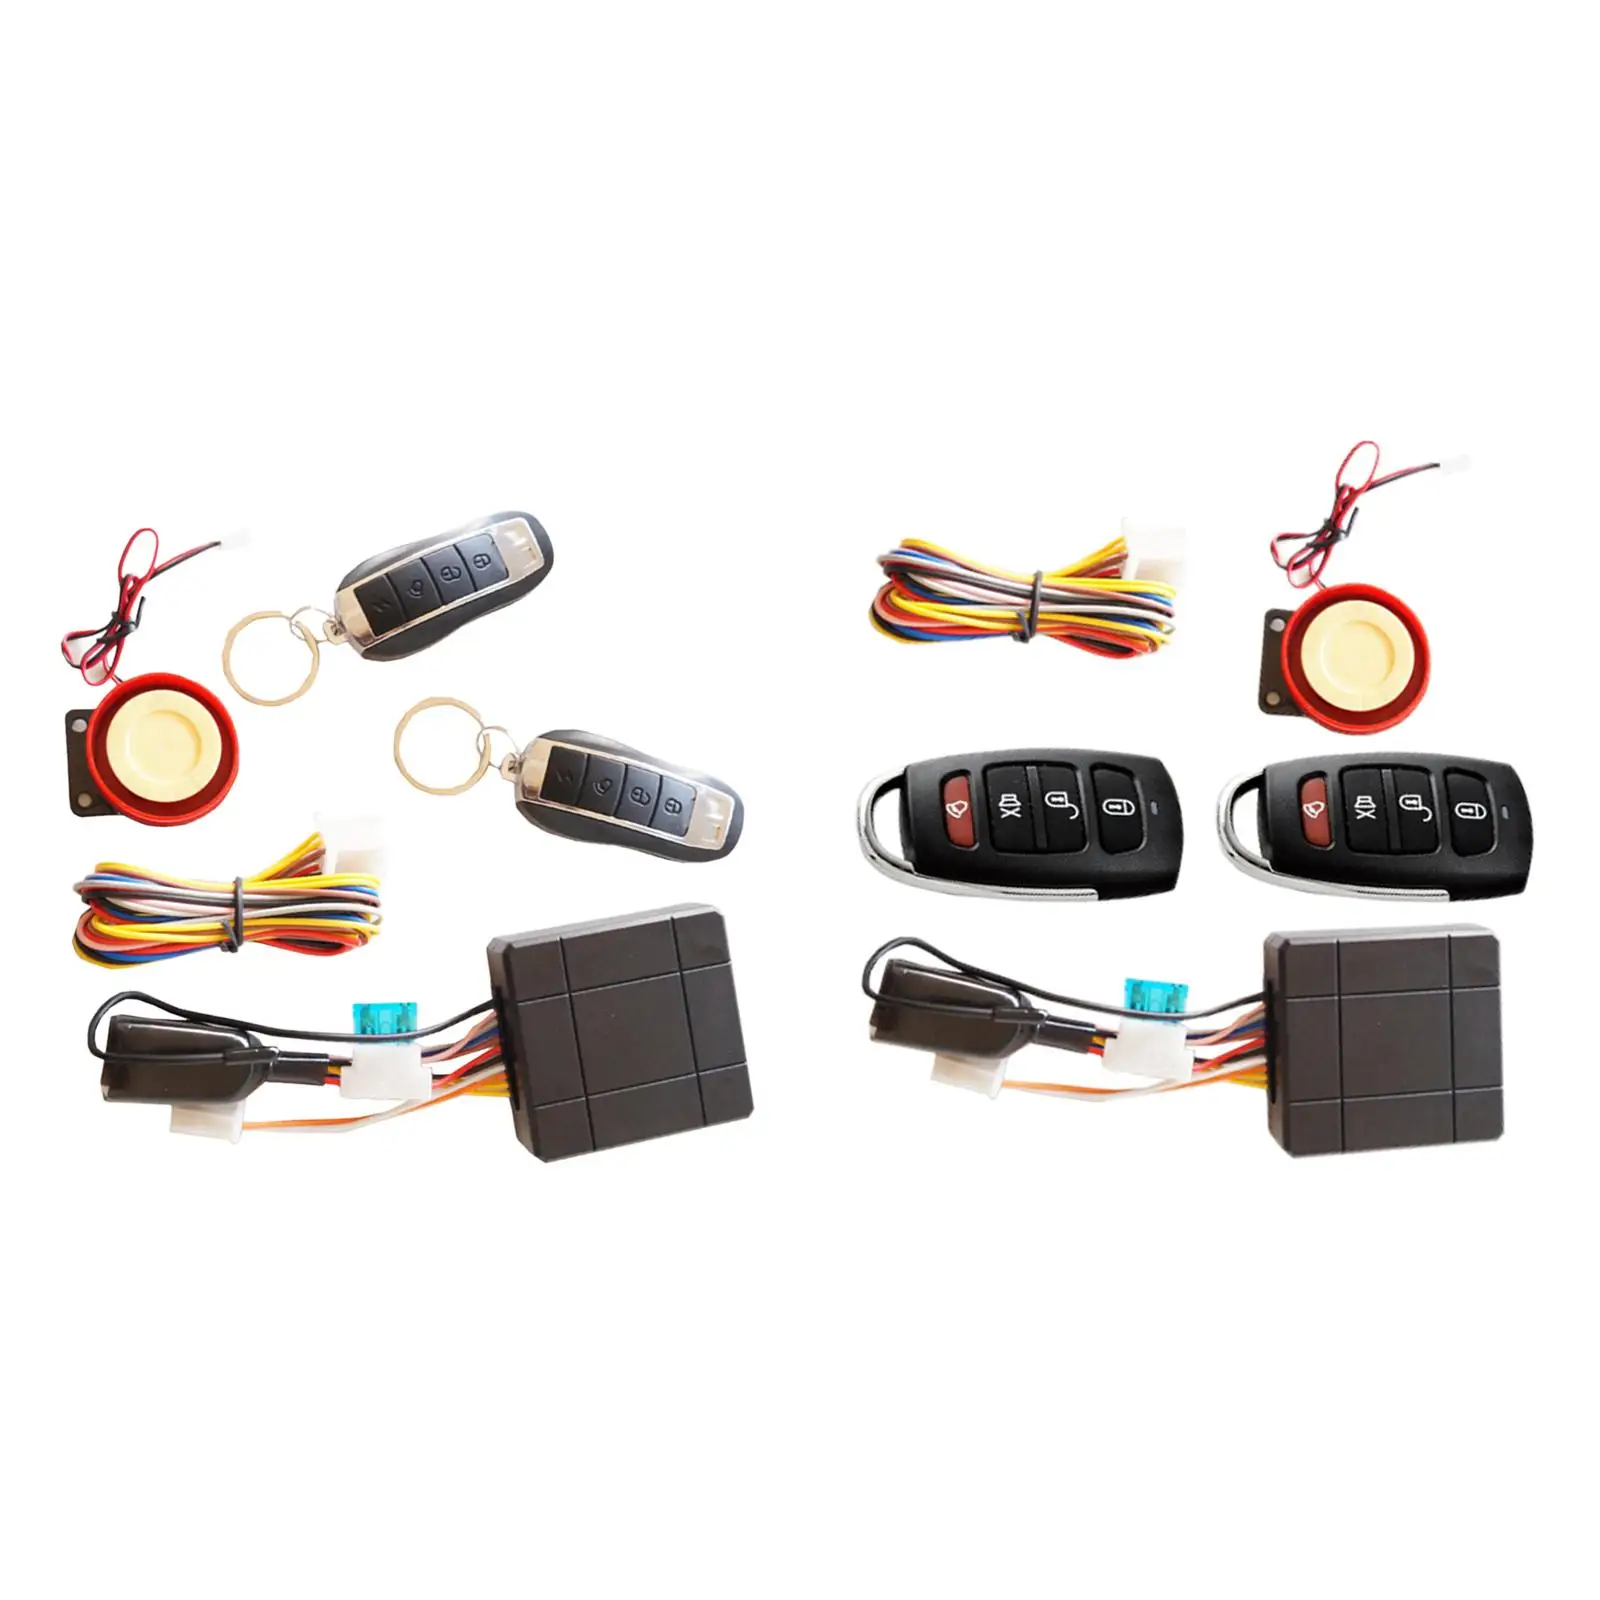 12V Motorcycle Alarm System App Remote Control Professional Electronic